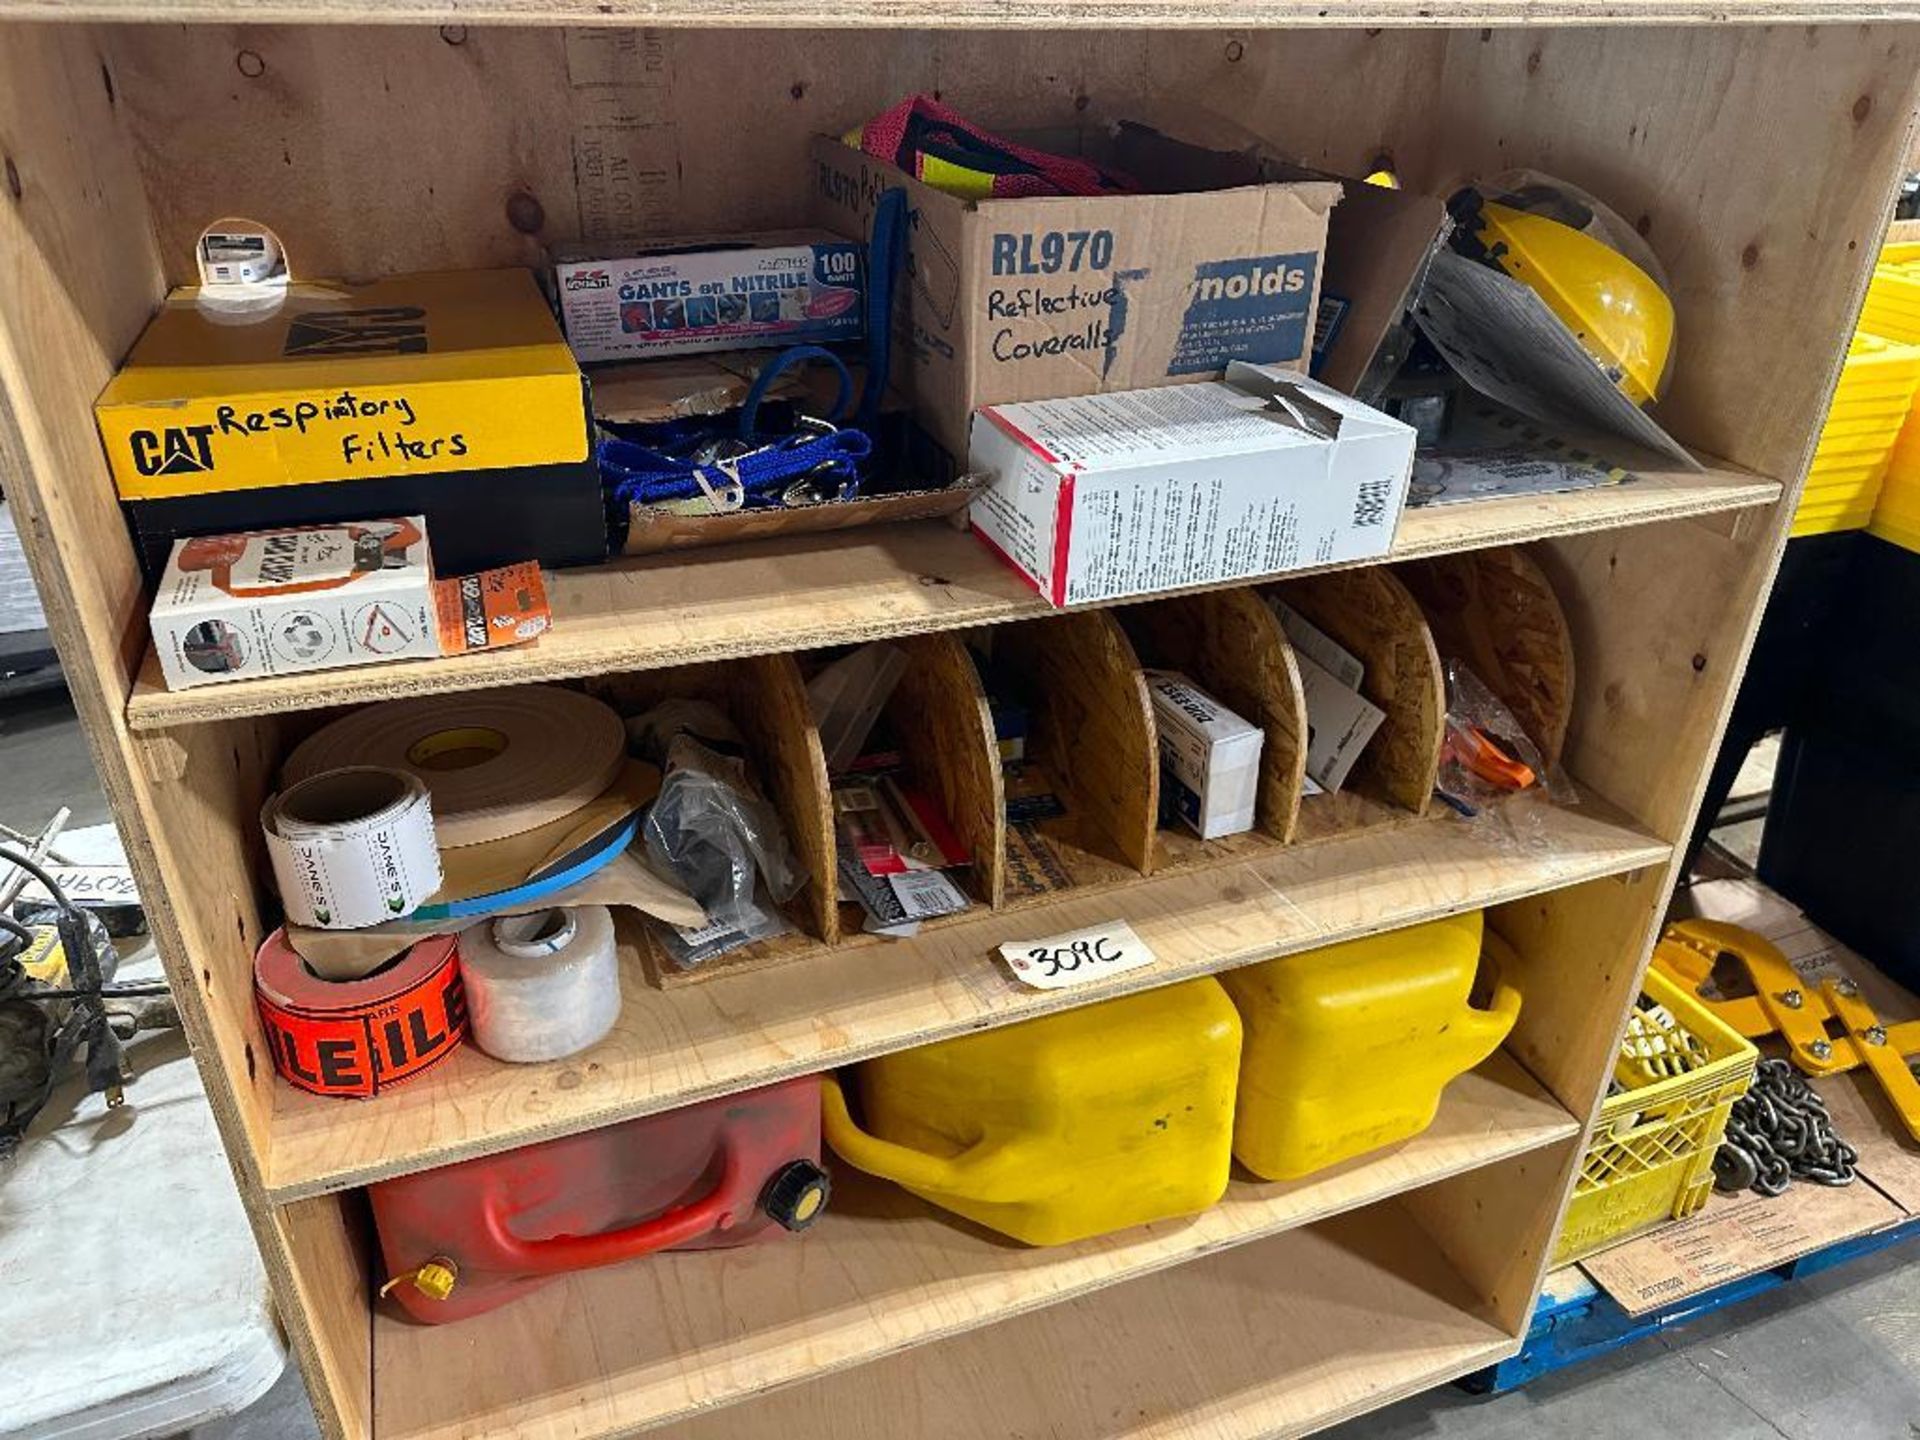 Contents of Wooden Shelf including Fuel Cans, Face Shield Headgear, Straps, etc. - Image 2 of 4